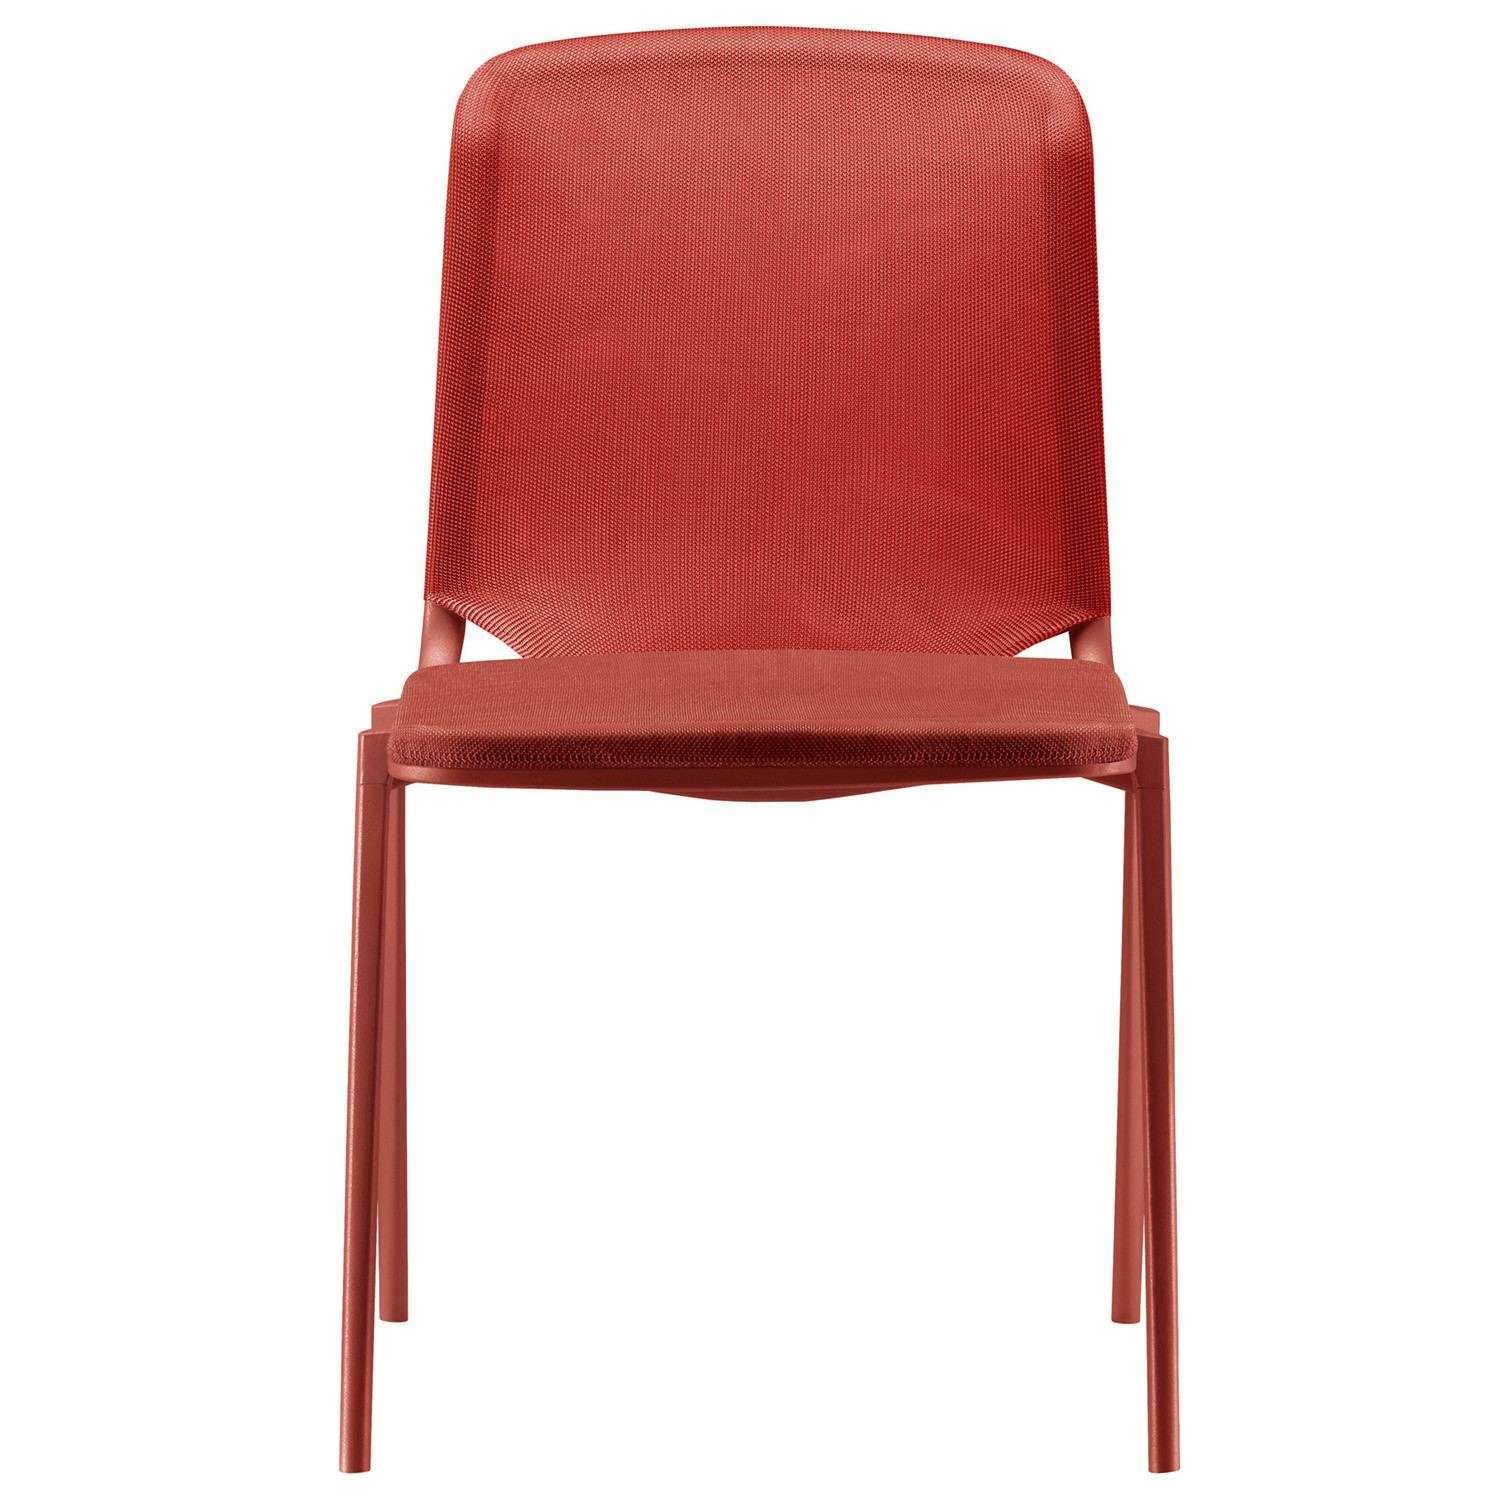 Hydrochair in coral red